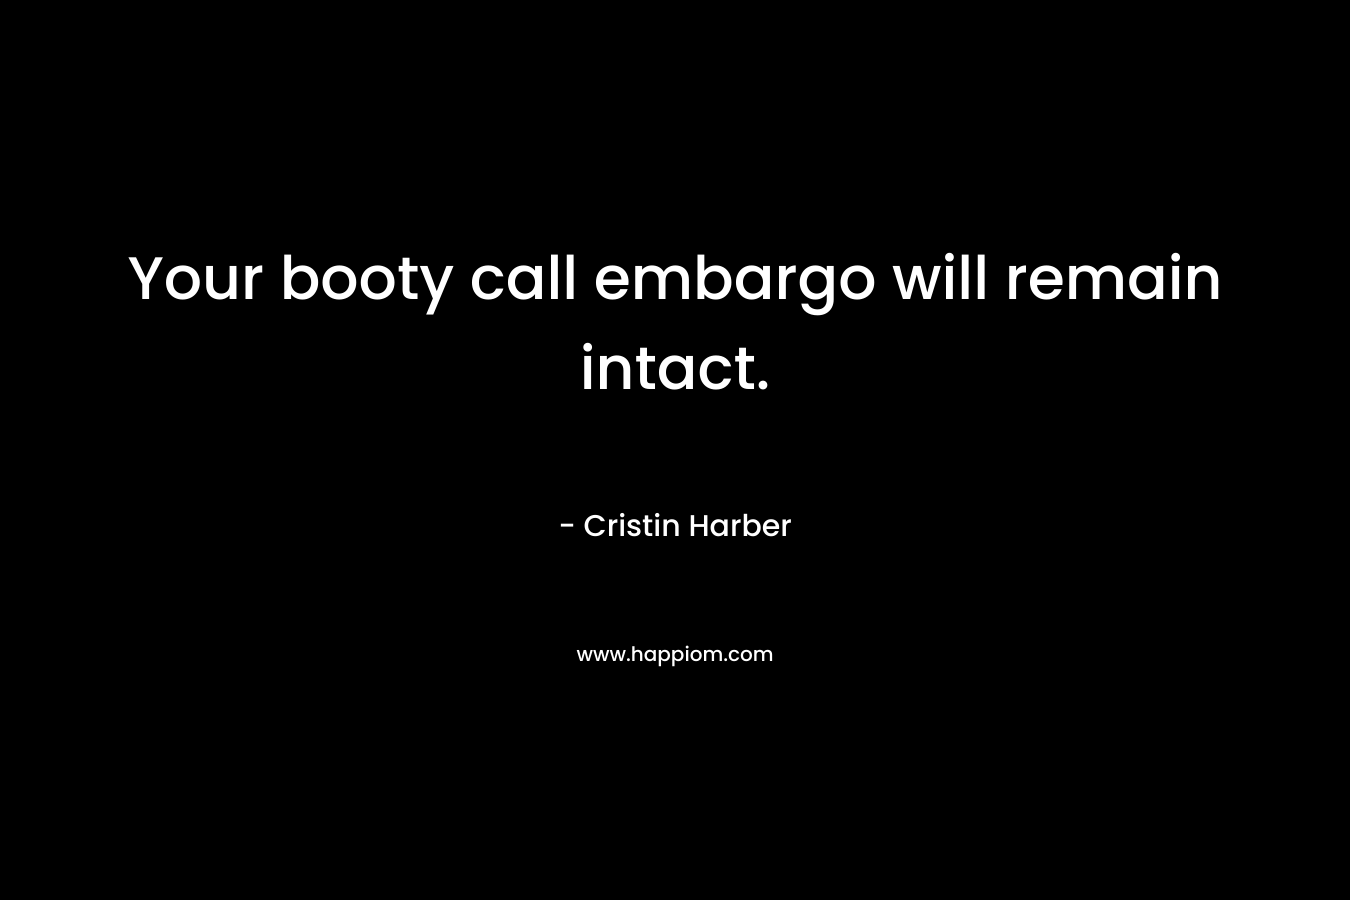 Your booty call embargo will remain intact. – Cristin Harber